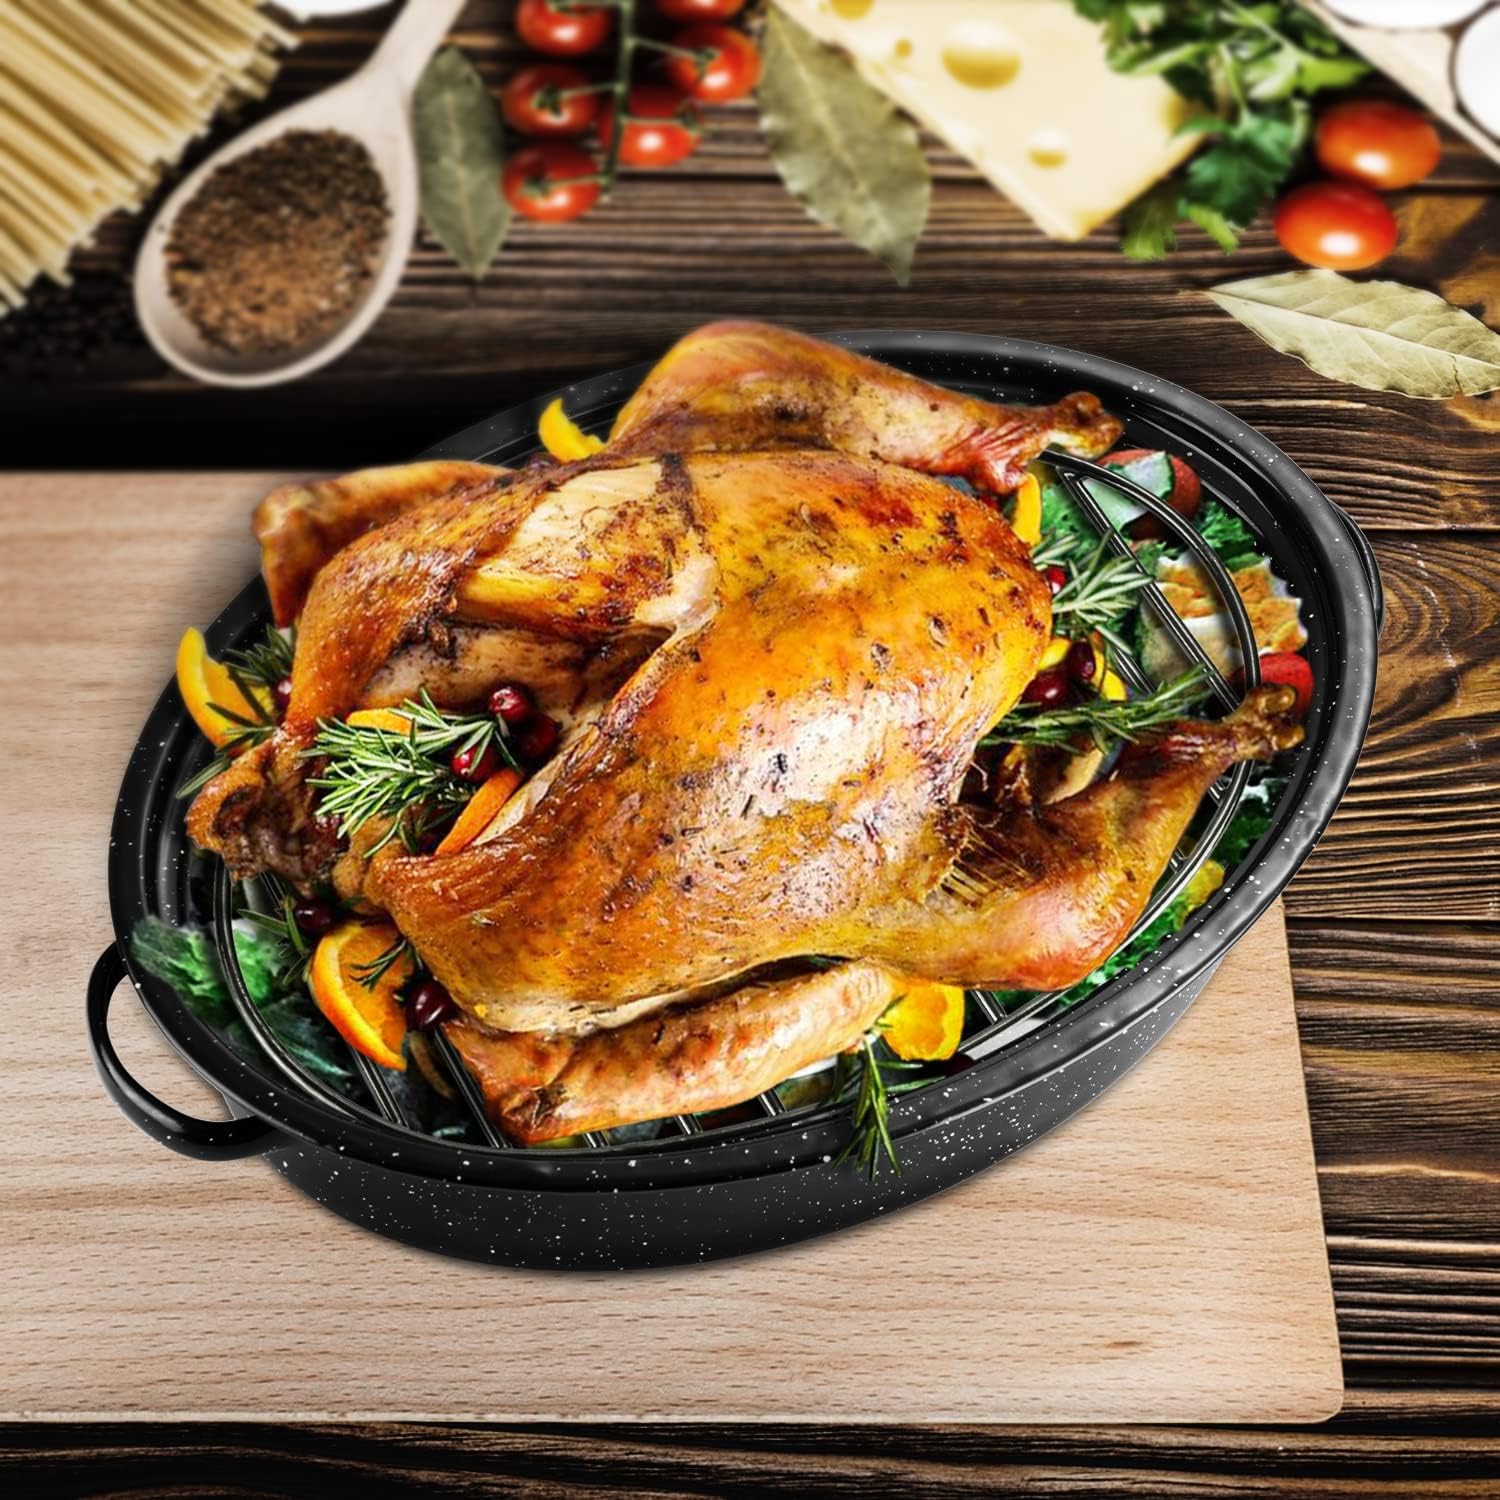 DIMESHY 13Inch Roasting Pan, Enamel on Steel, Black Covered Oval Roaster  Pan with Lid, Small Cookware for Turkey, Small Chicken, Roast Baking Pan.